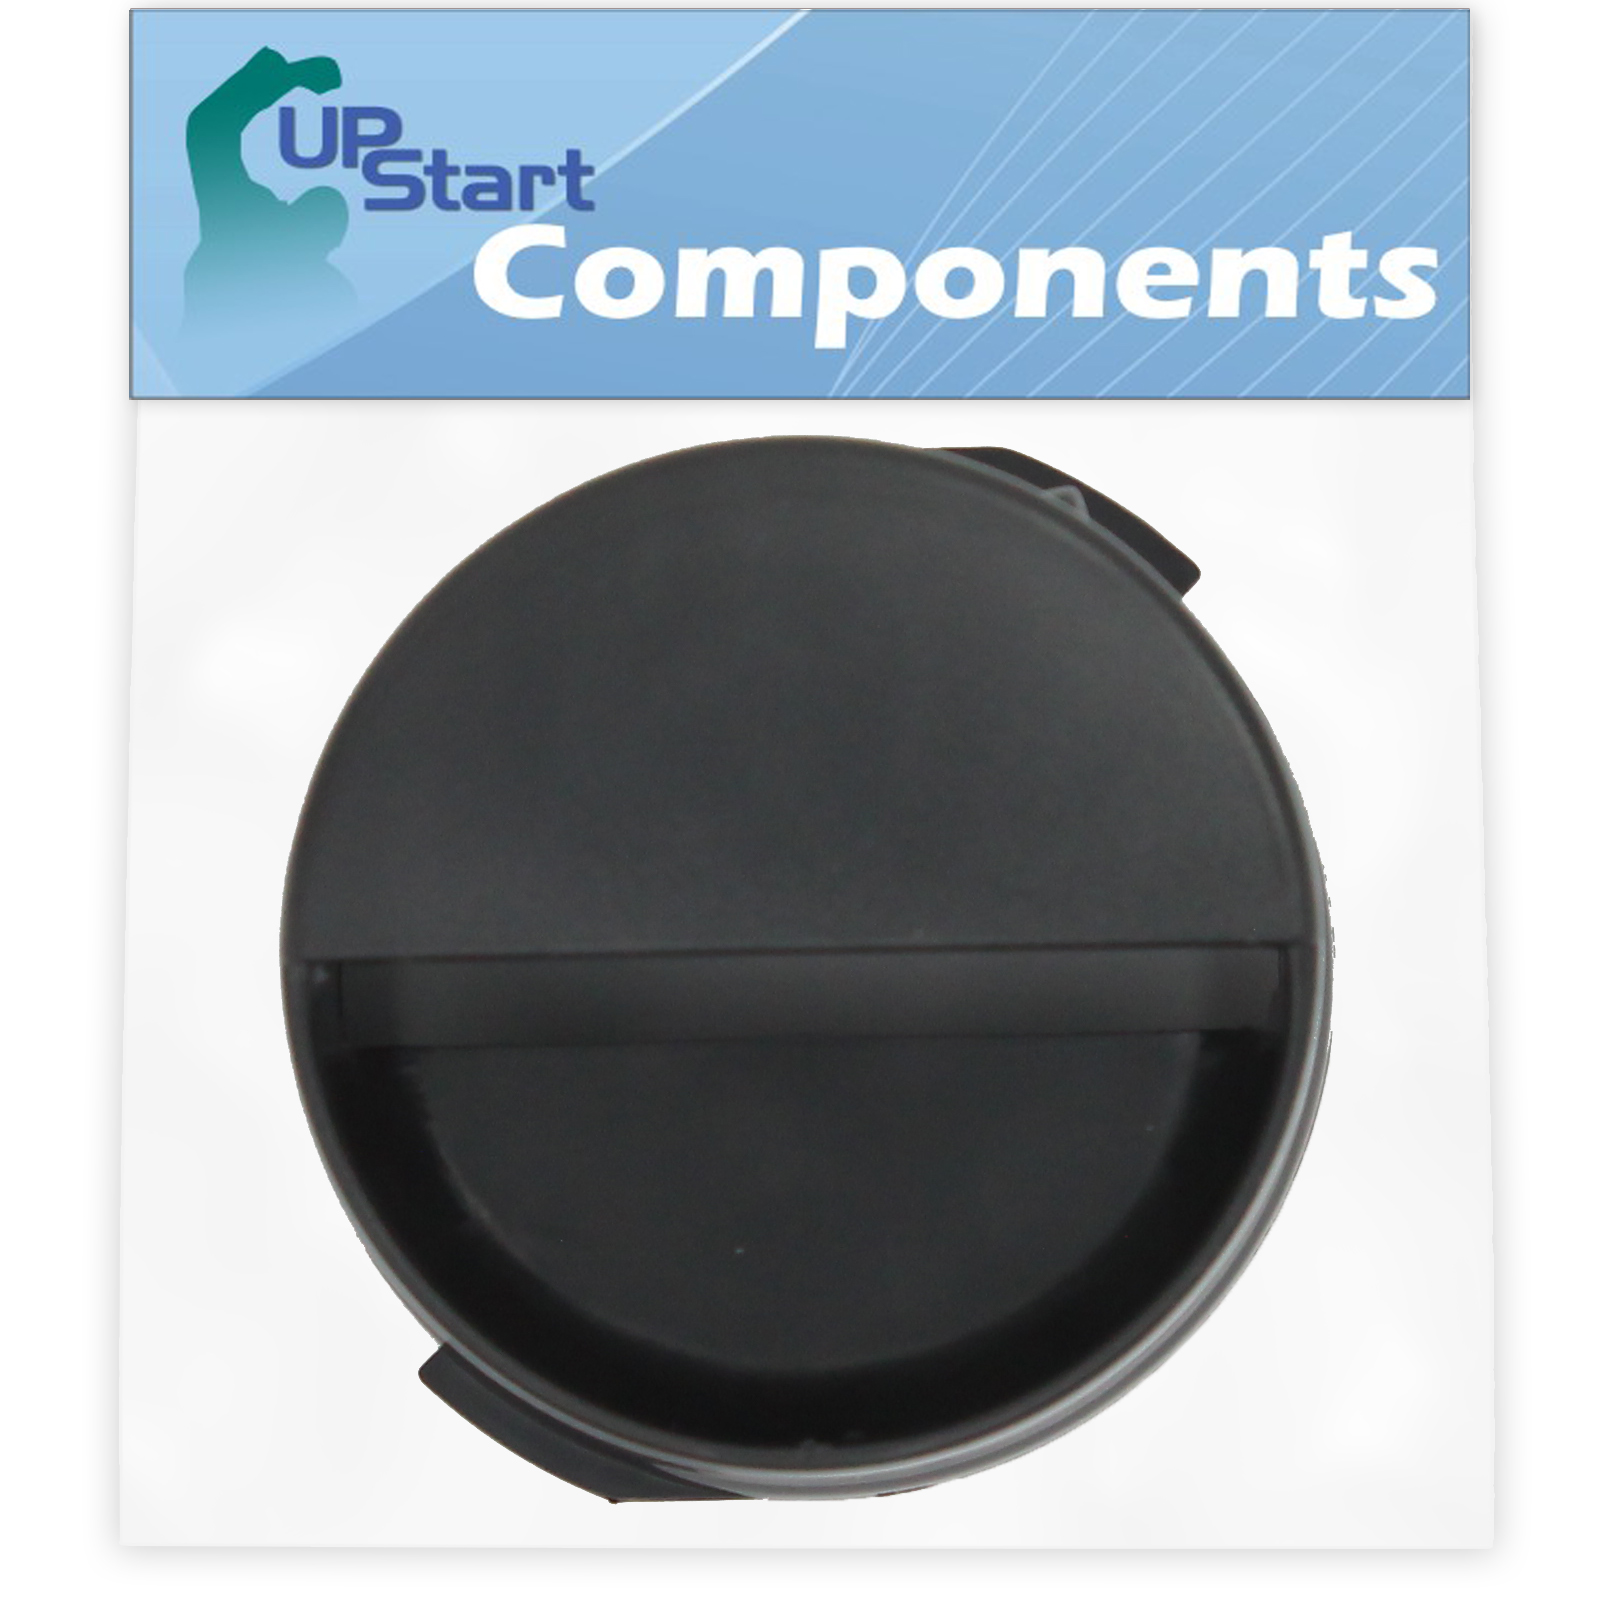 2260502B Refrigerator Water Filter Cap Replacement for Kenmore / Sears 10656533400 Refrigerator - Compatible with WP2260518B Black Water Filter Cap - UpStart Components Brand - image 1 of 4